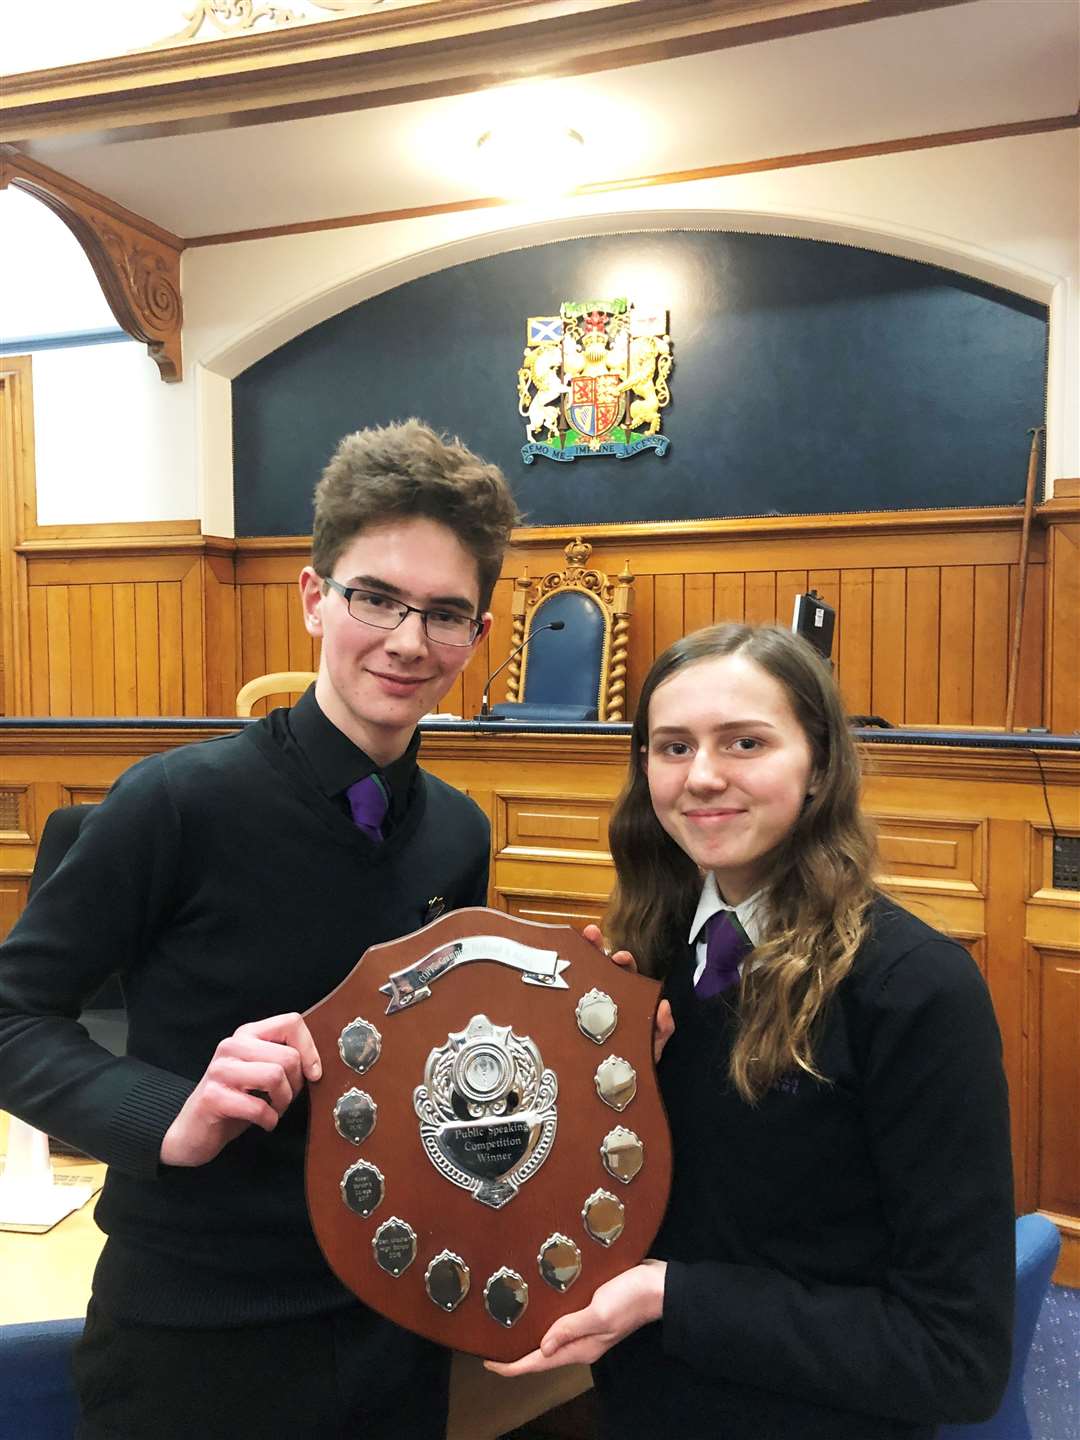 Harry Ratcliffe and Lauren Parsons with their trophy.